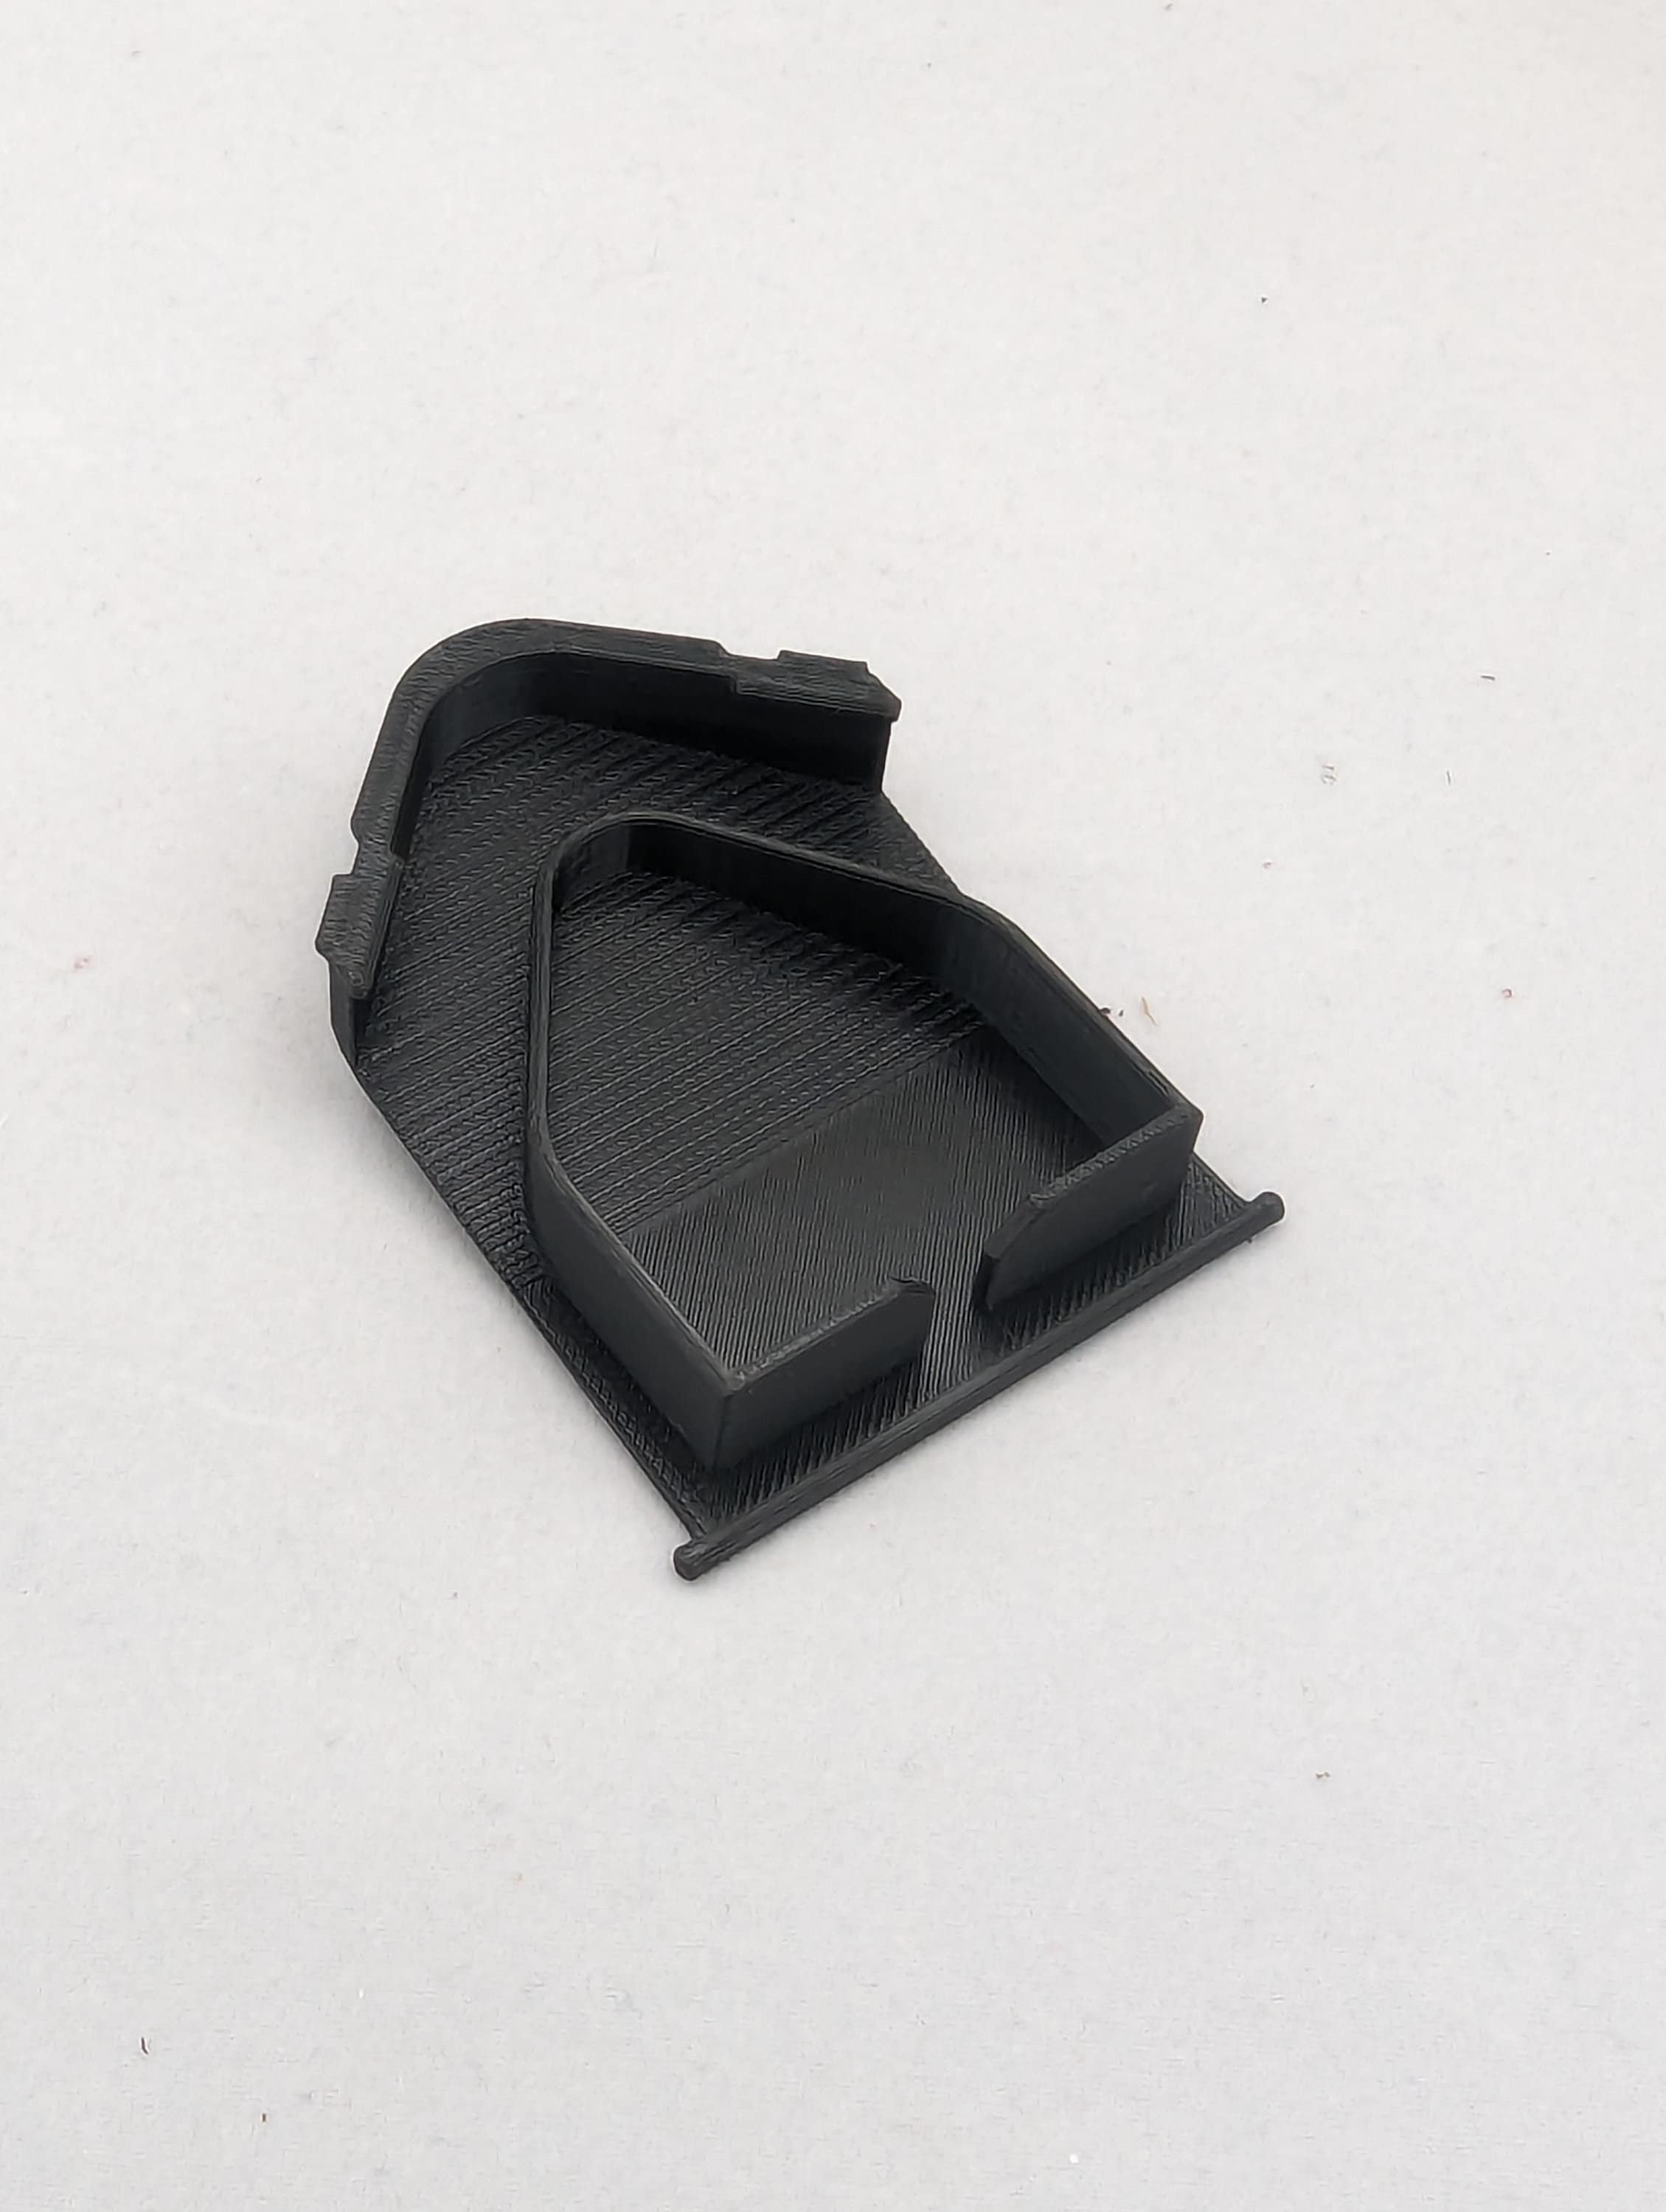 Pour Spout Cover Replacement For Ninja Blender Lid 72 Pitchers